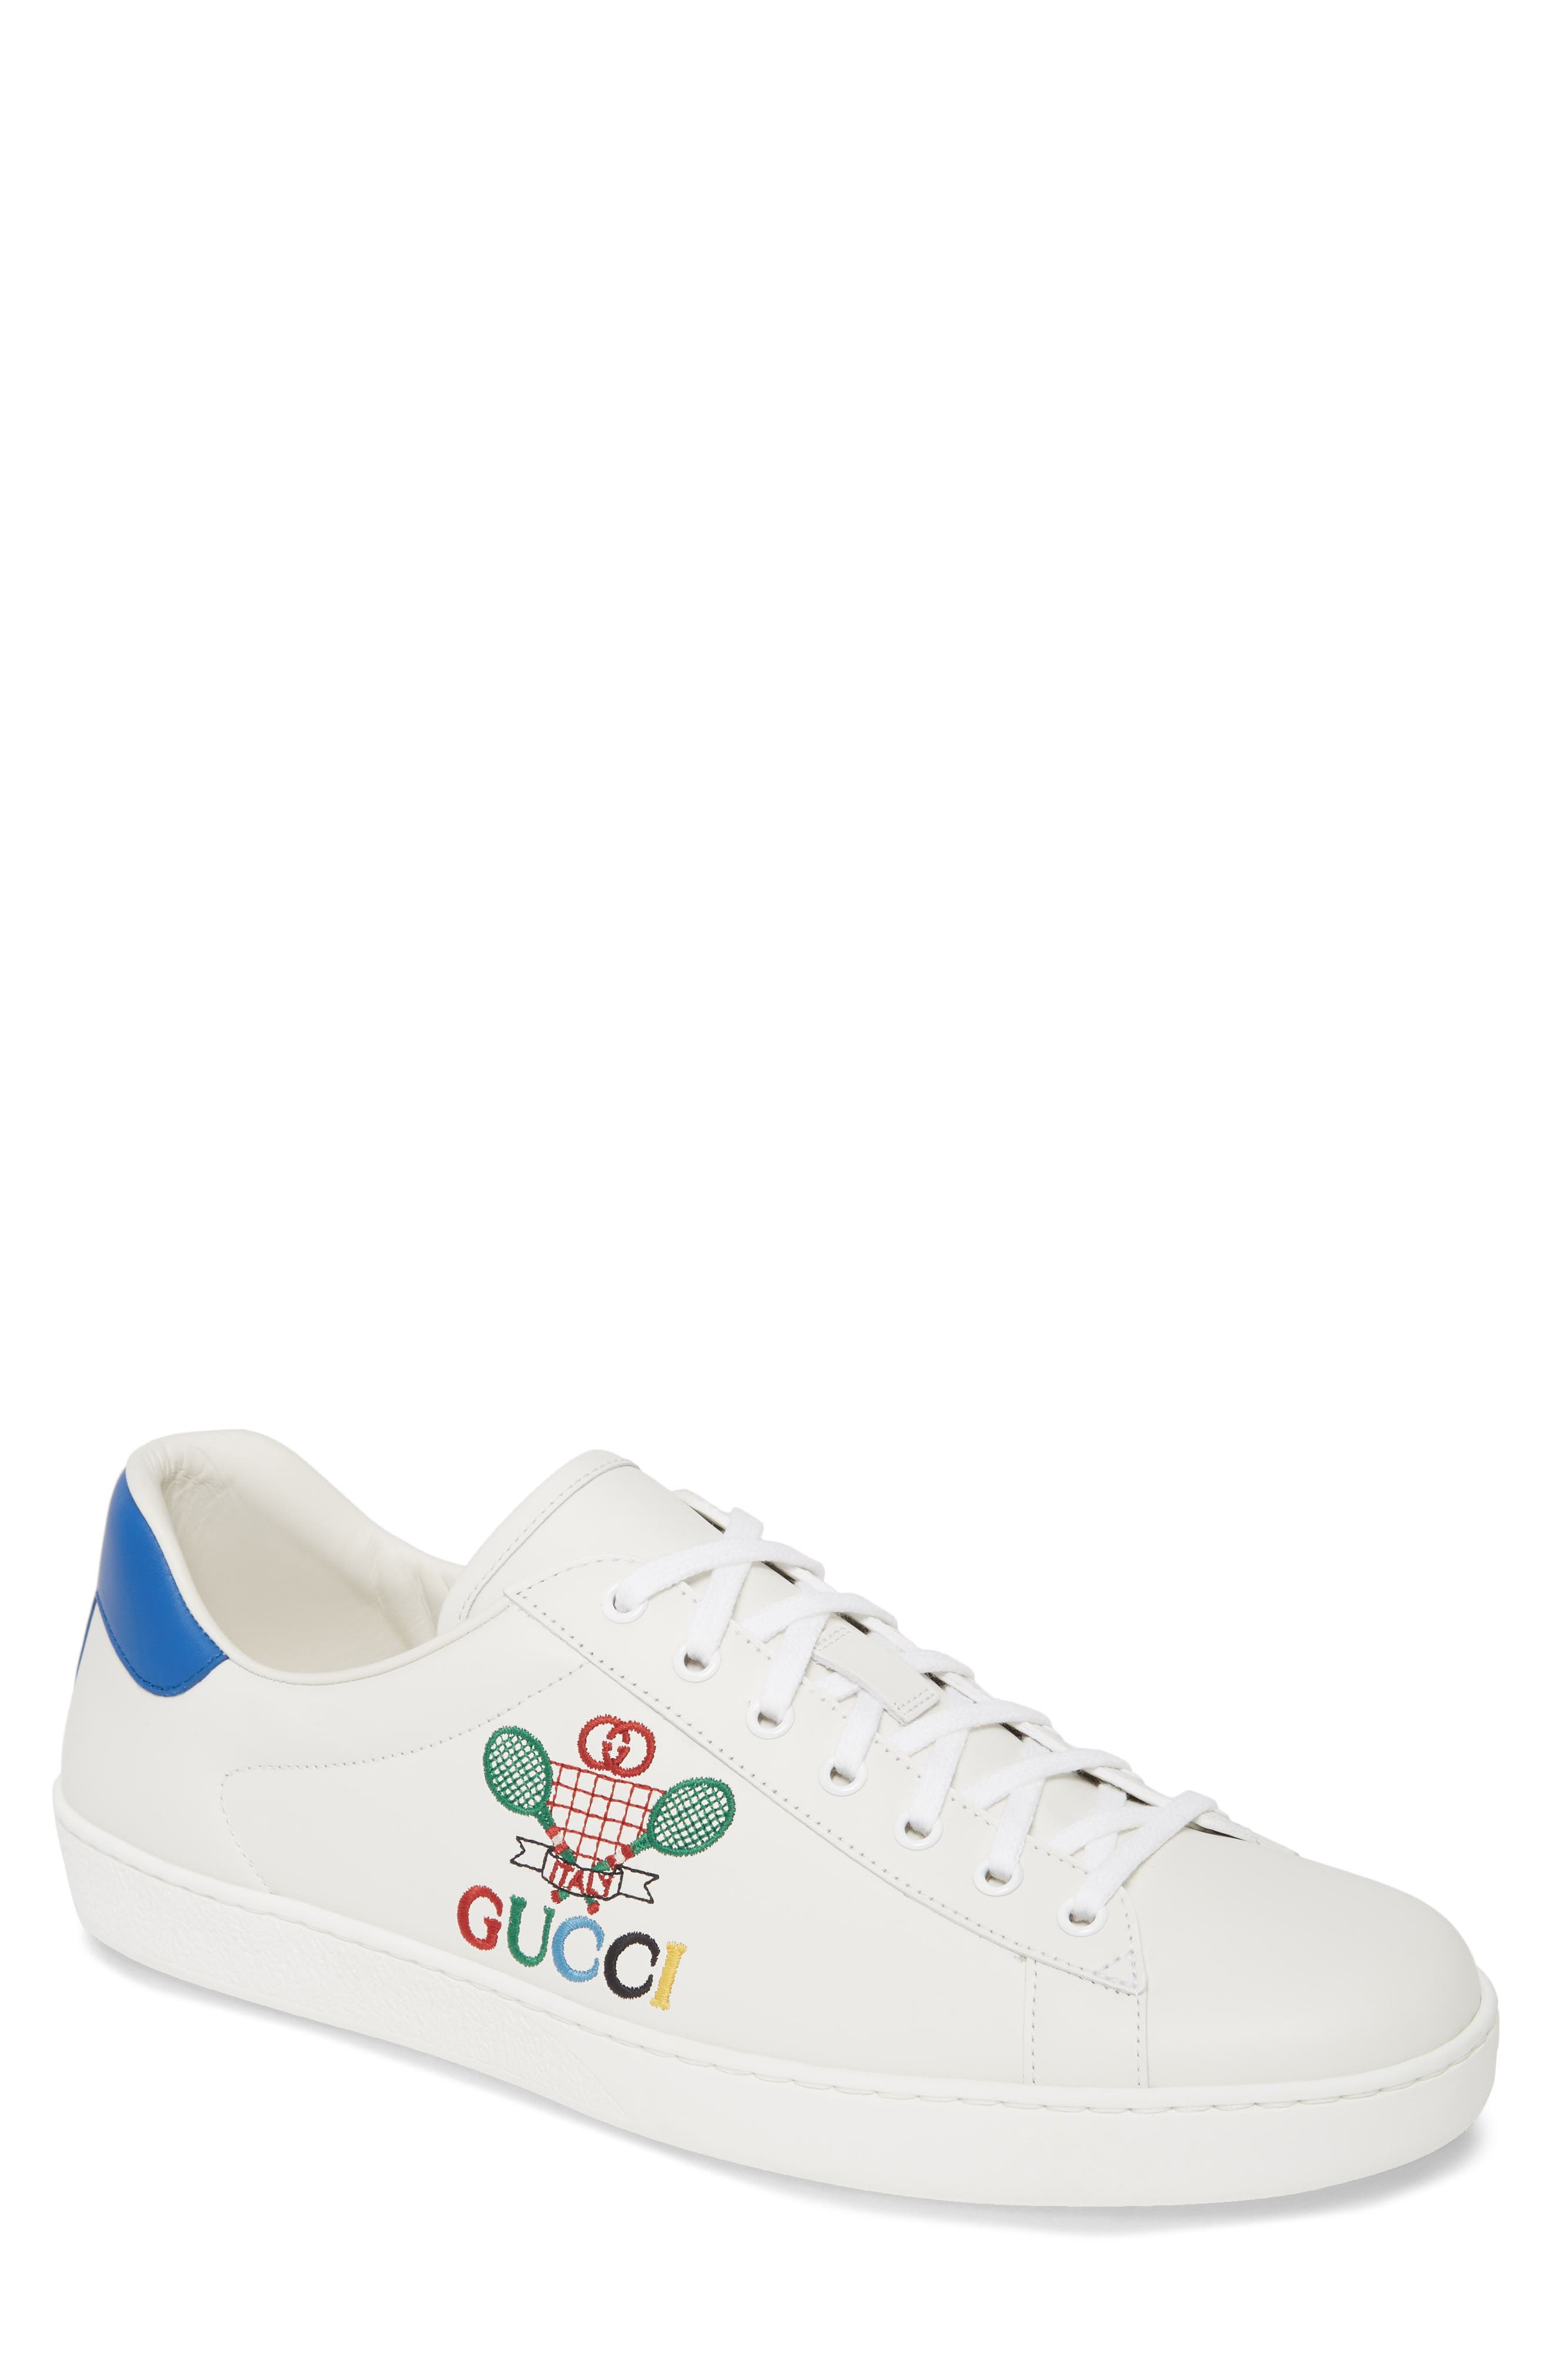 1987 gucci sneakers,Save up to 19%,www.ilcascinone.com